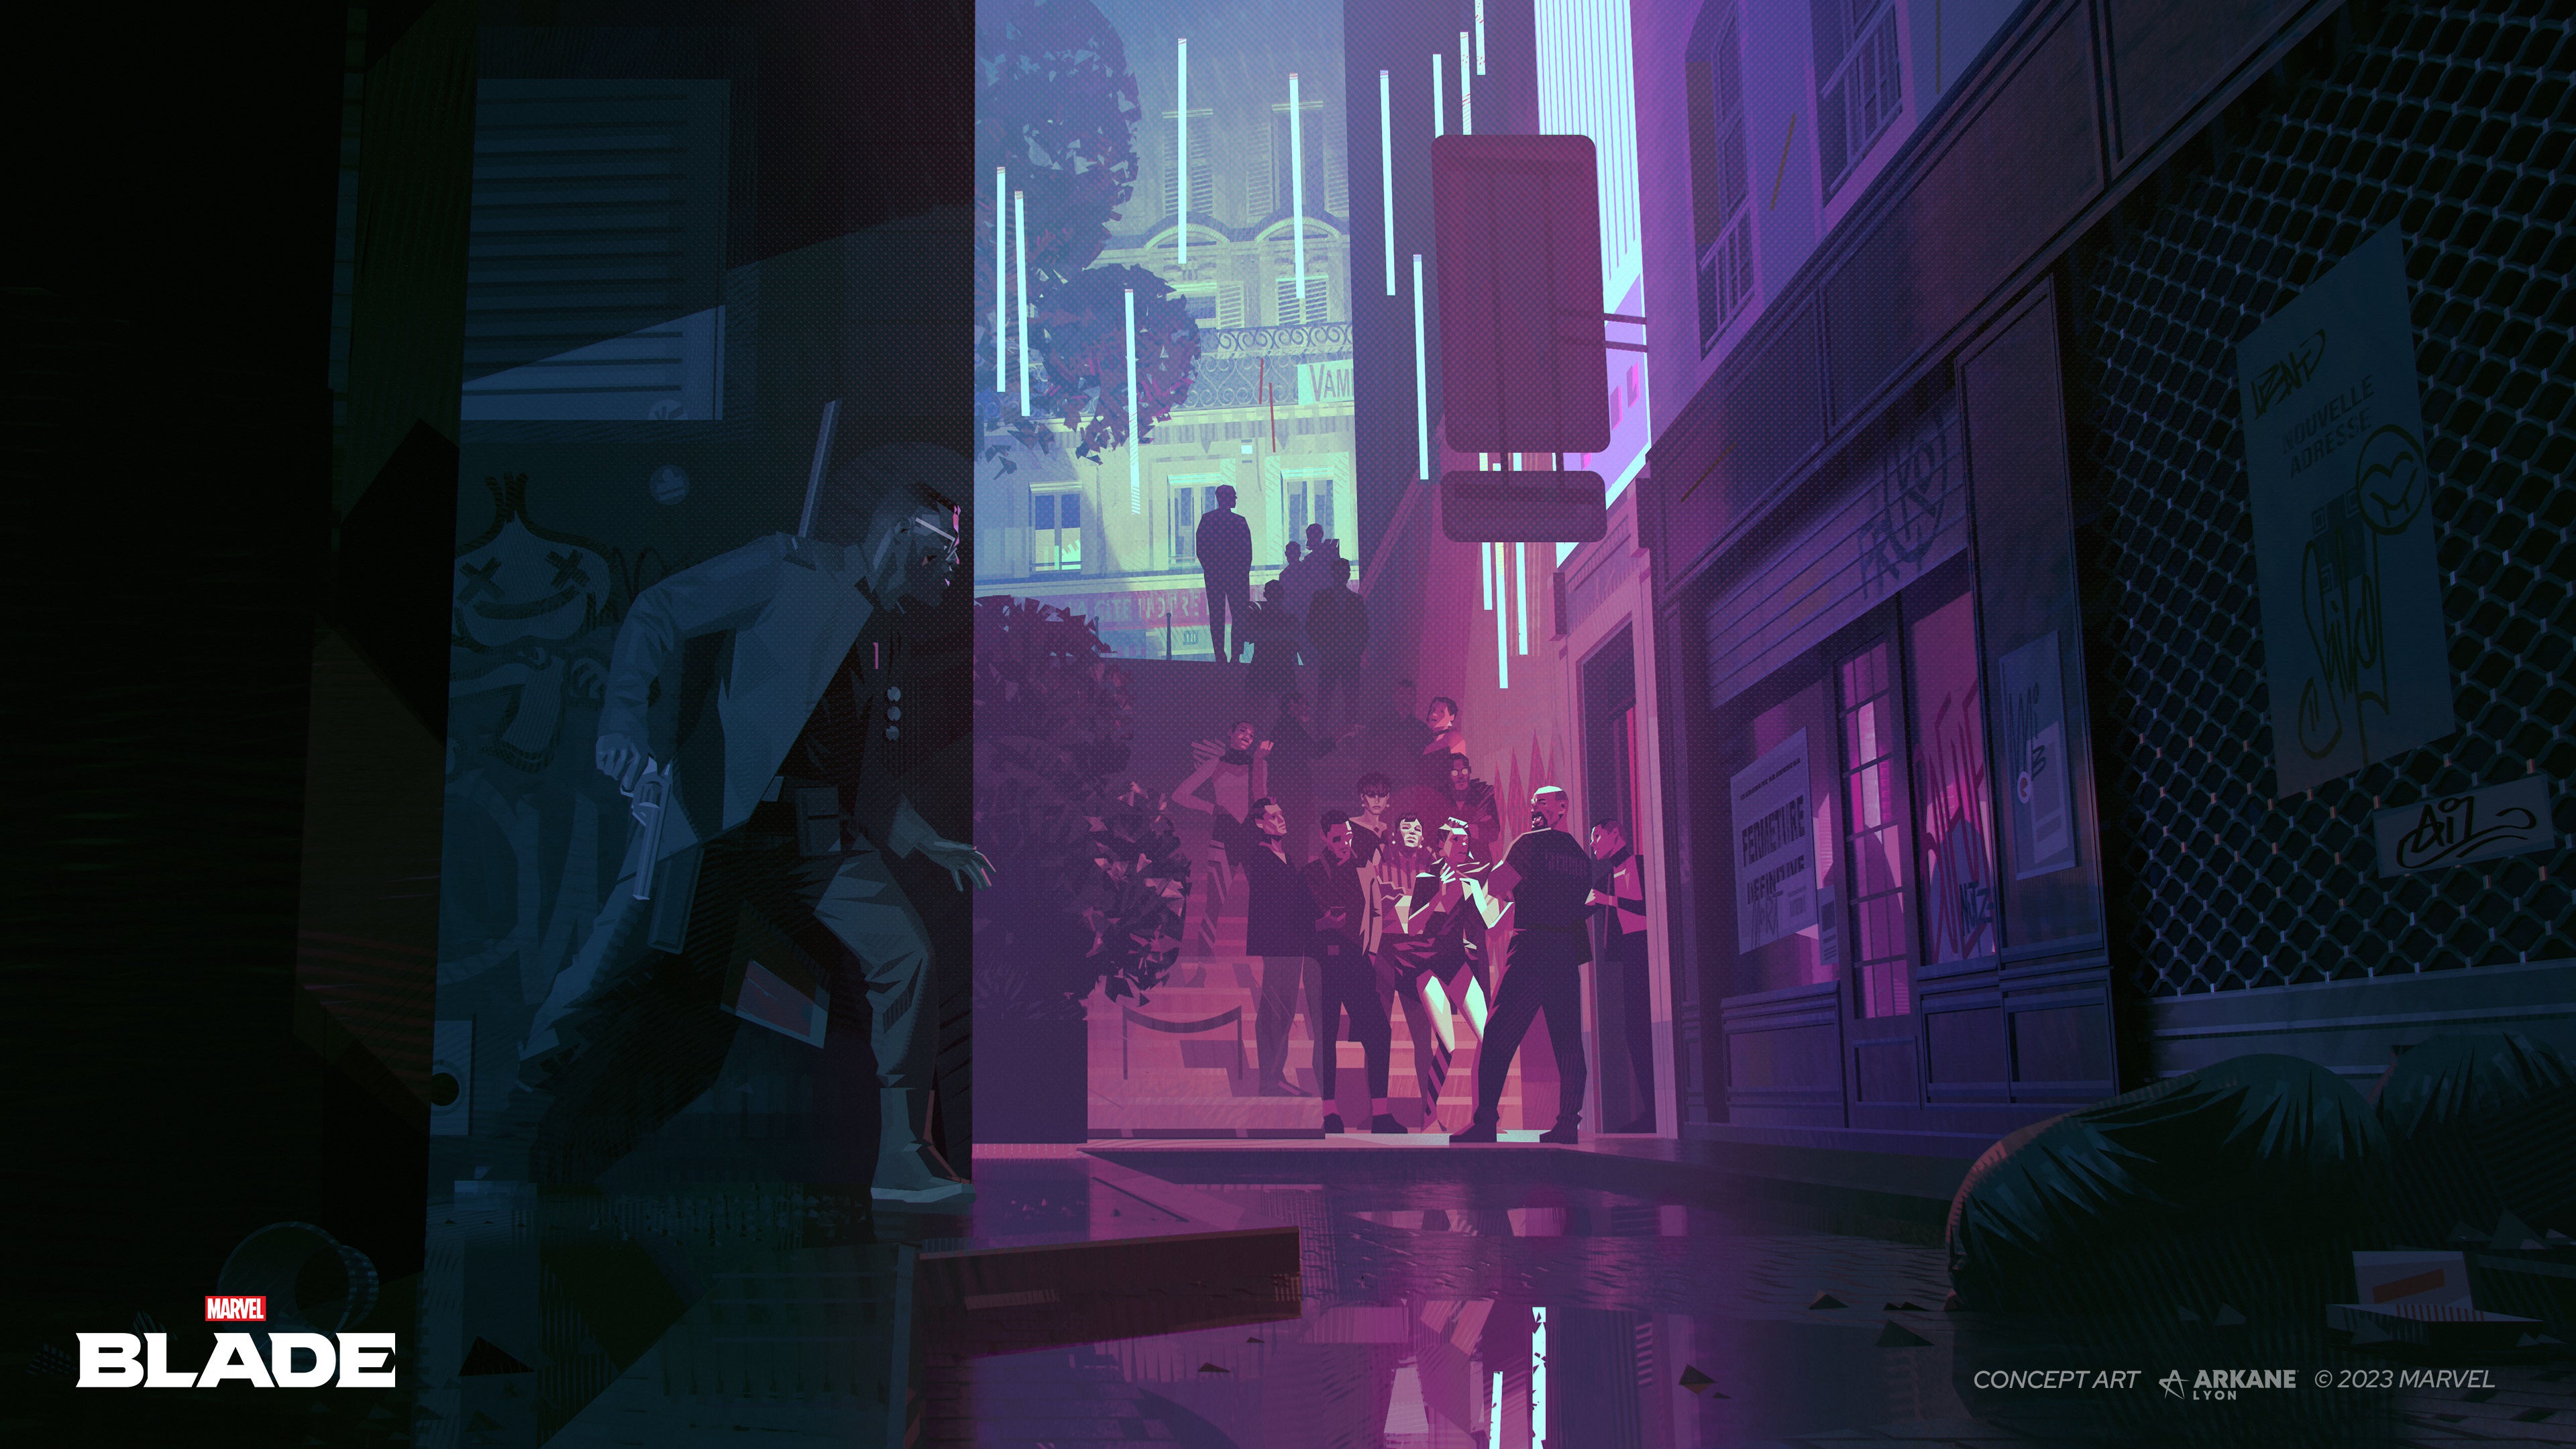 Concept artwork for Arkane's Blade game, showing Blade hunkered down in an alleyway watching the entrance to a nightclub with crowds of people outside